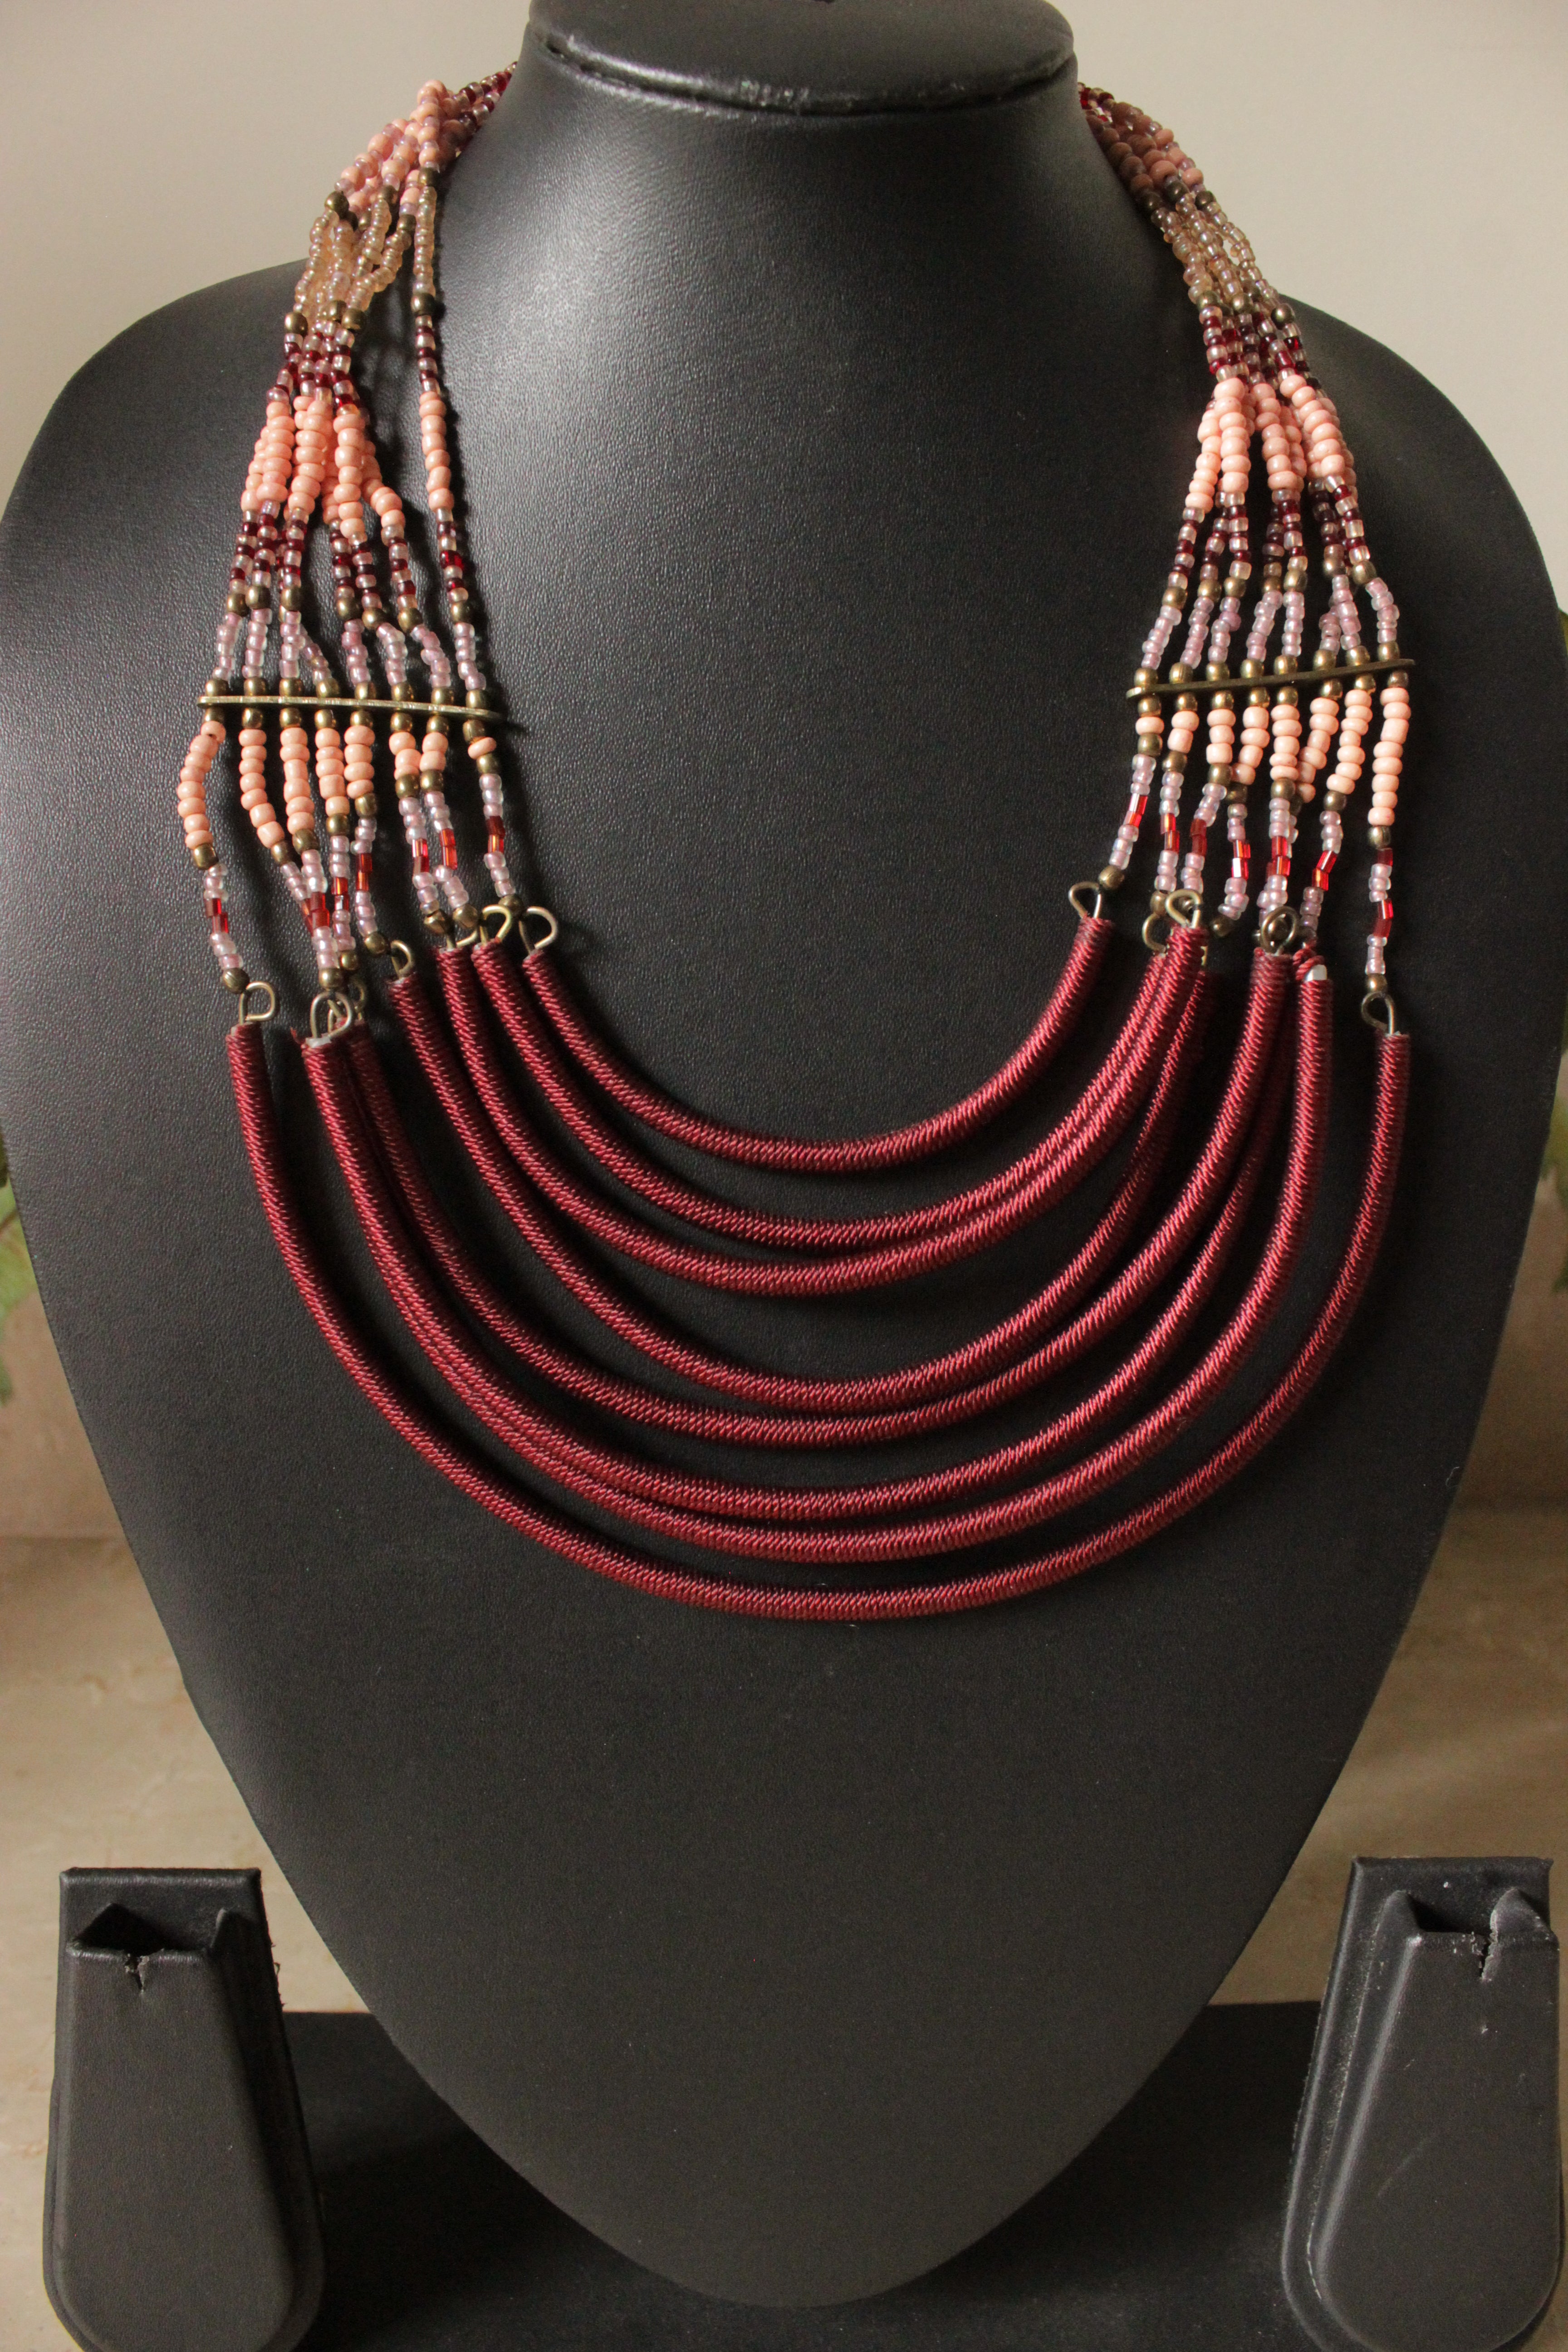 Shades of Red Multi-Layer Fabric & Beads Necklace